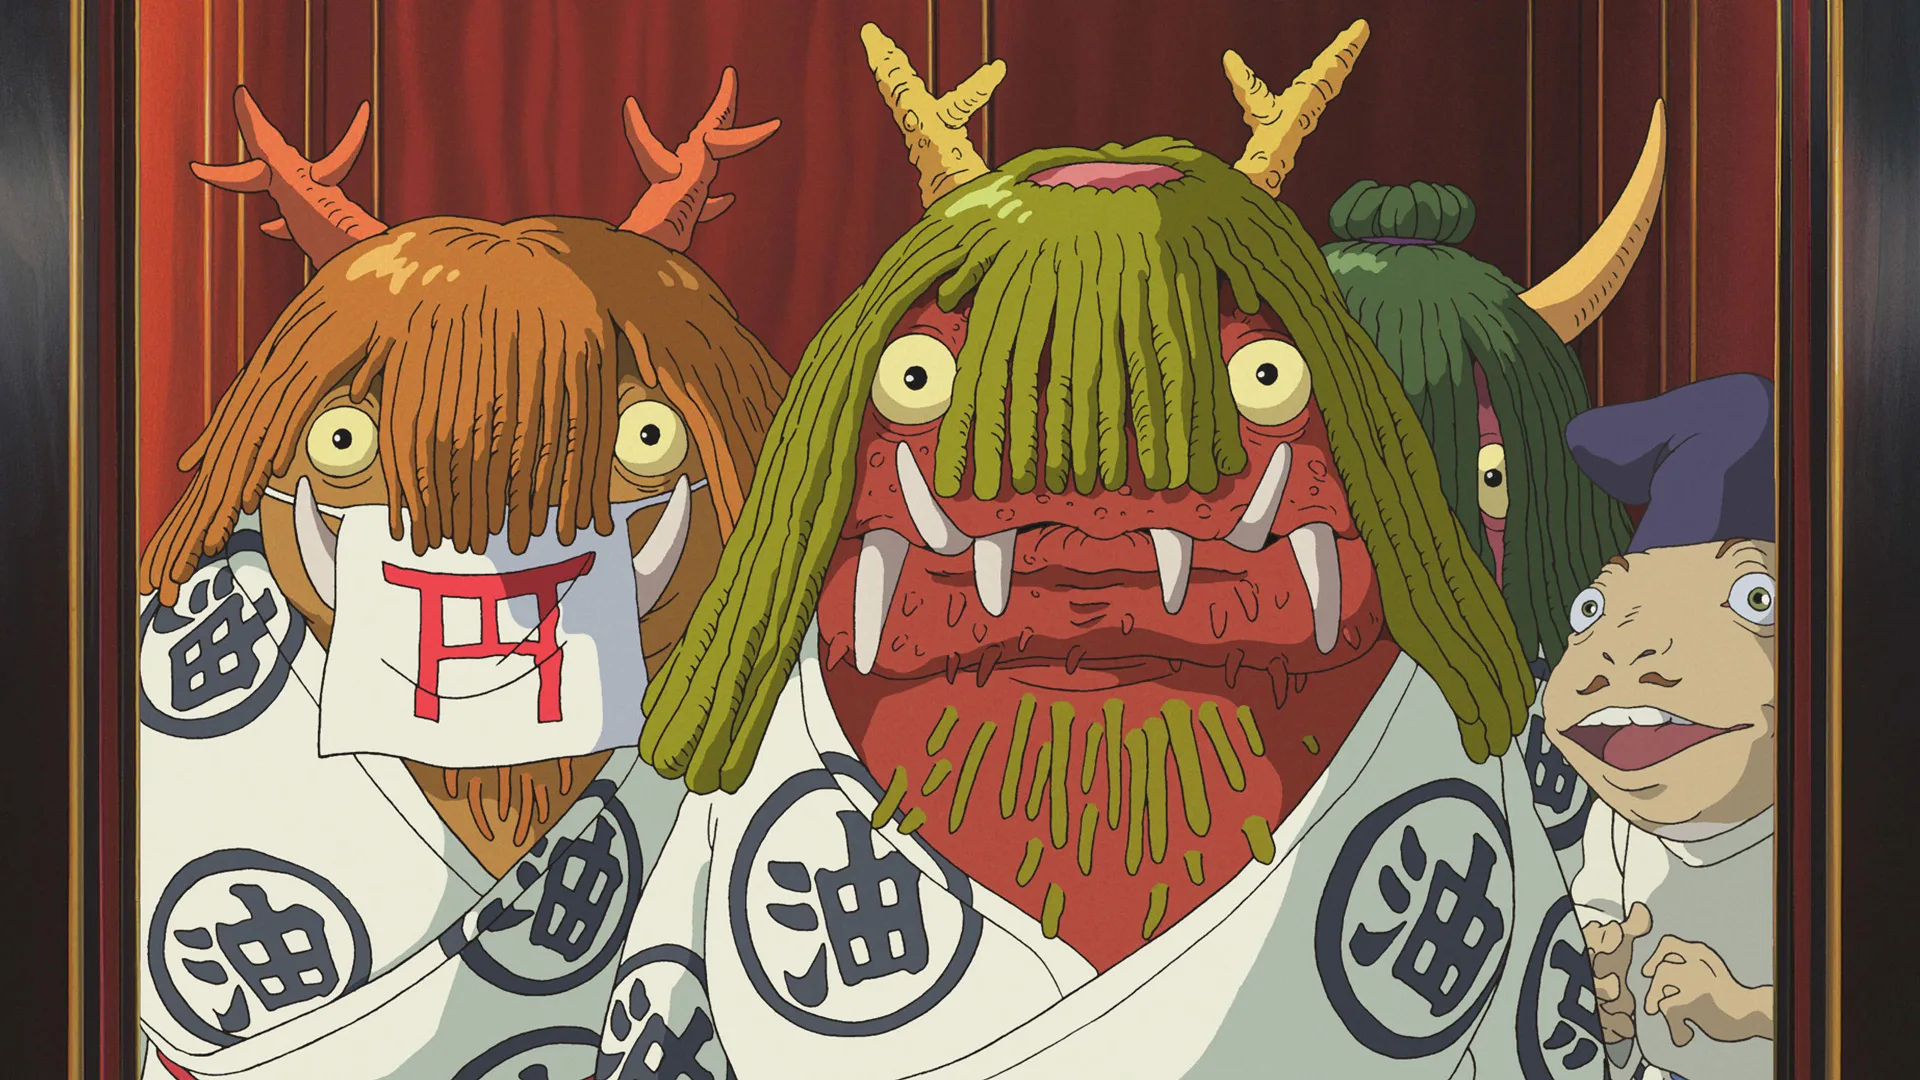 A still from the animated movie Spirited Away showing some monster characters looking surprised at something